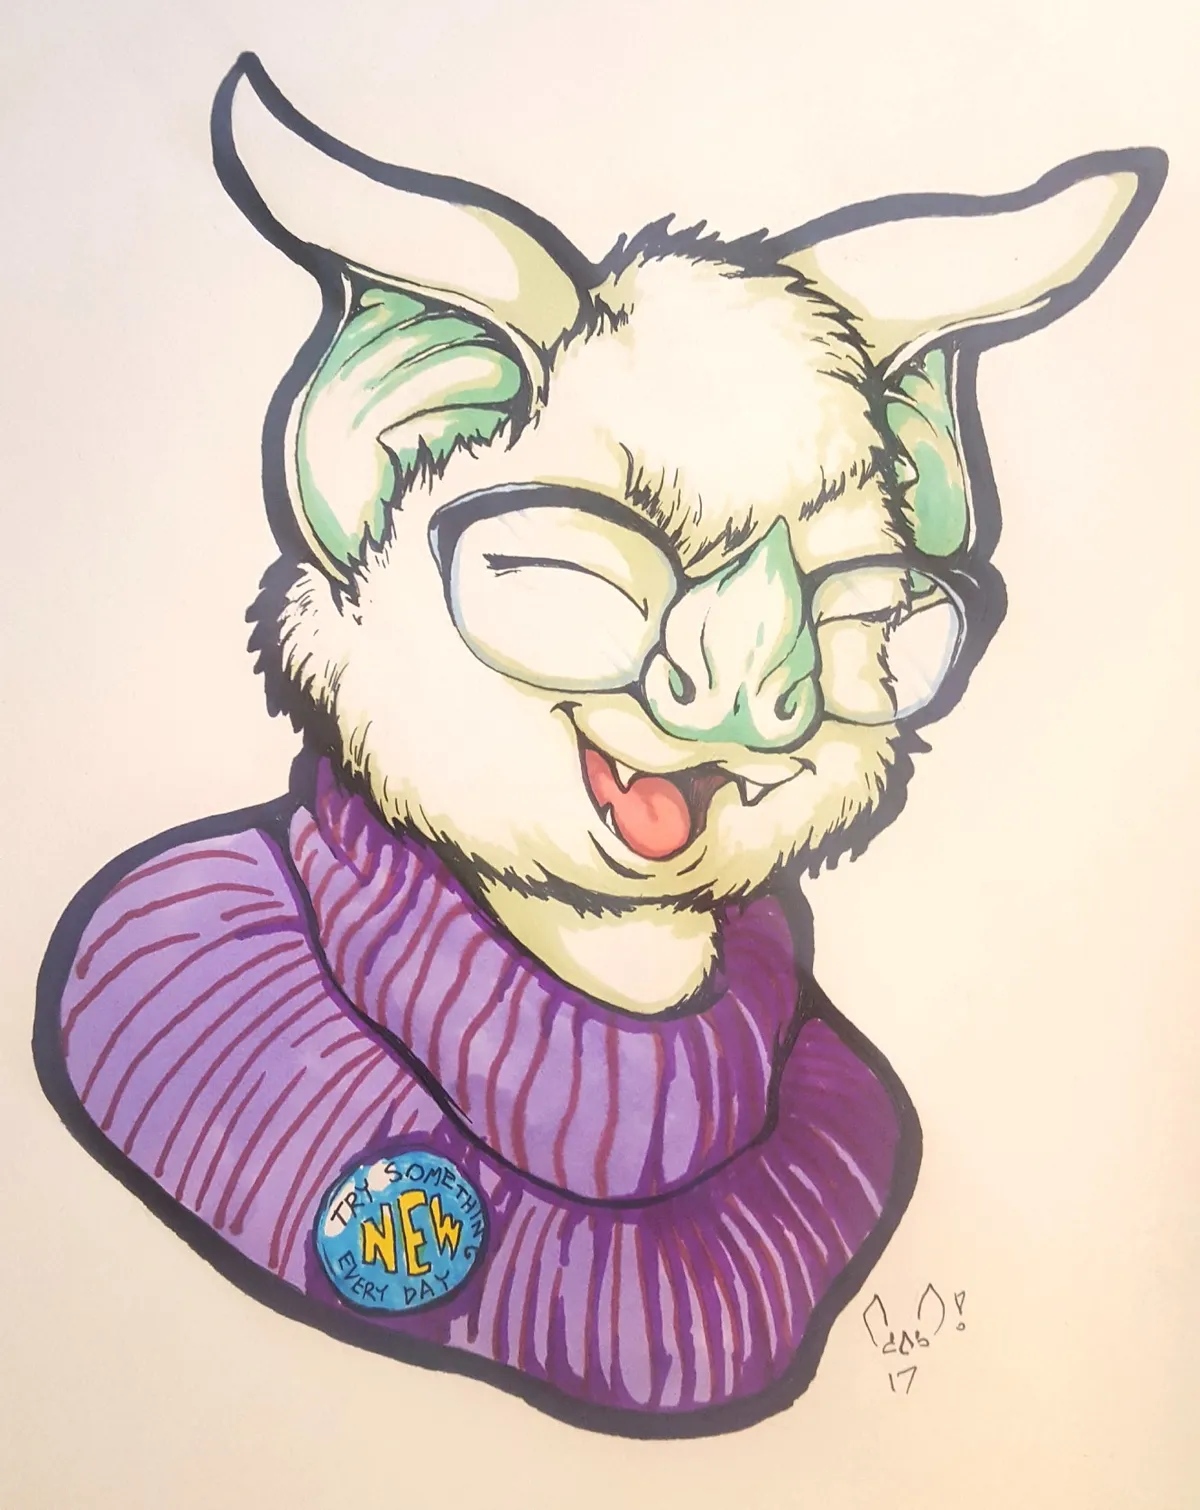 A hand-drawn illustration of an anthropomorphic Honduran white bat bust, wearing large round glasses and a pink sweater with a button badge reading 'Try Something NEW Every Day'. She's smiling with her mouth open, exposing her fangs.